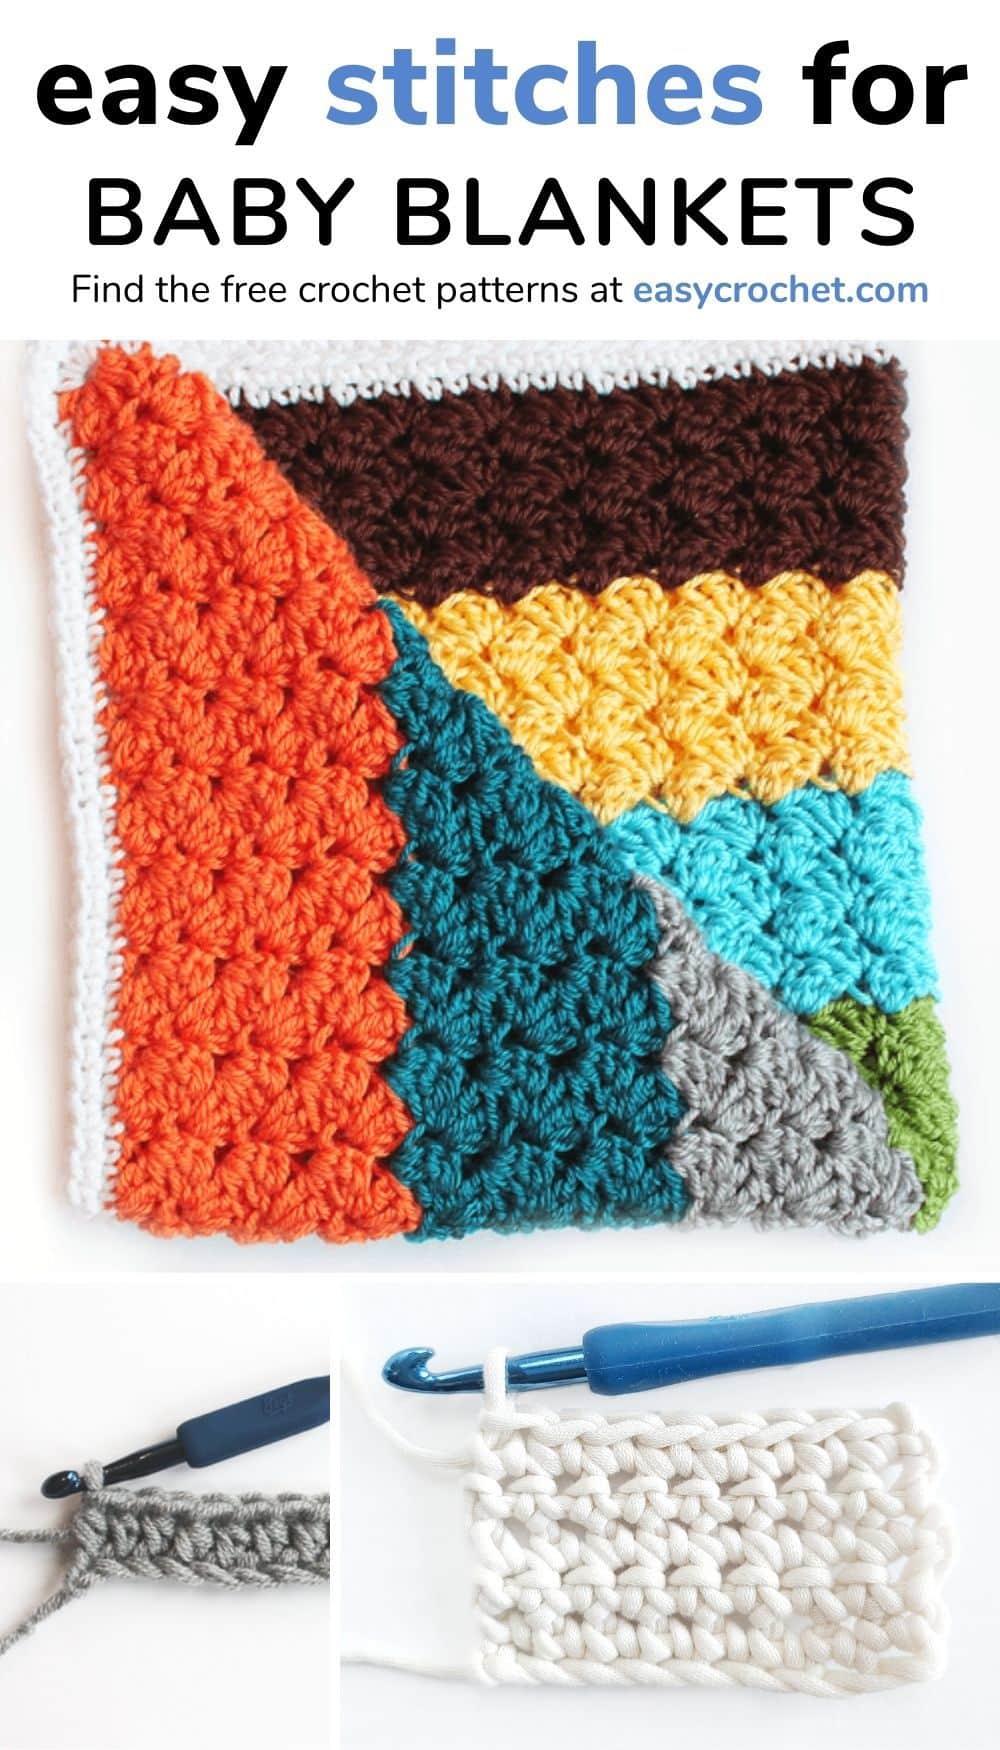 easy crochet stitches for baby blankets